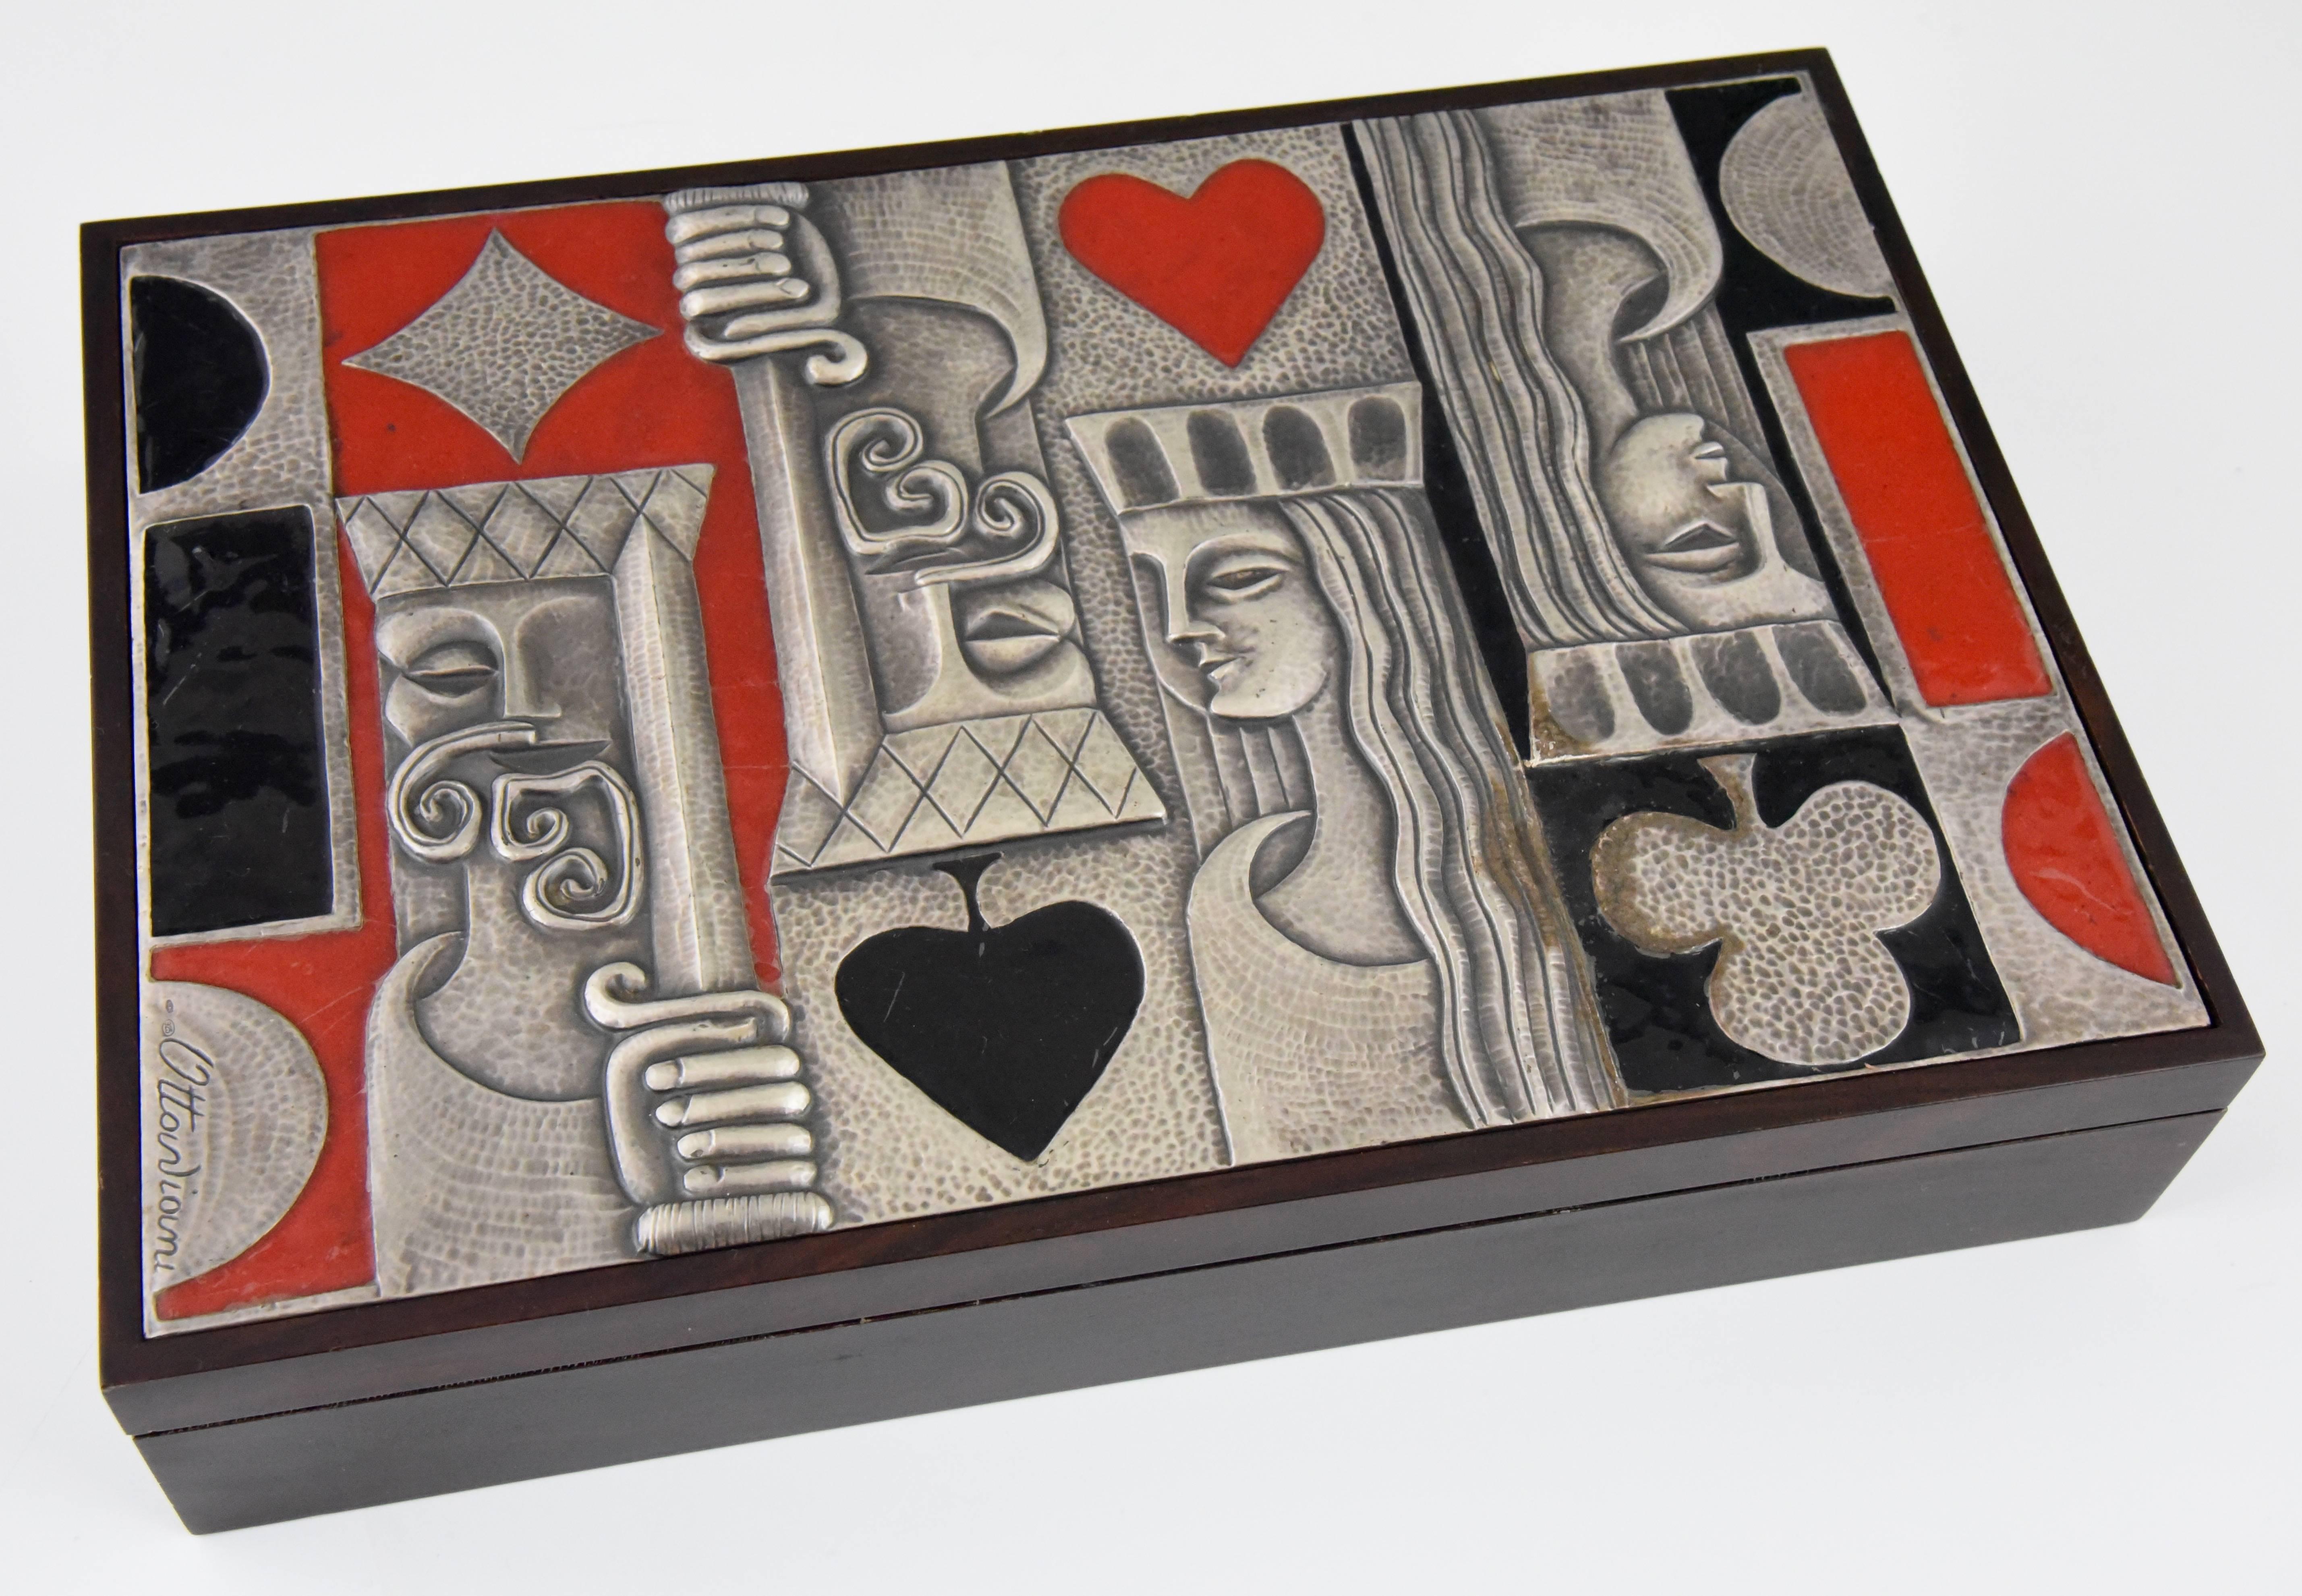 Wooden game box with enameled sterling silver top including game items by Ottaviani (1945) a jewelry and silver firm located in the small seaside town of Recanati, Italy. They had a particularly inventive period from the mid-1950s until circa 1970